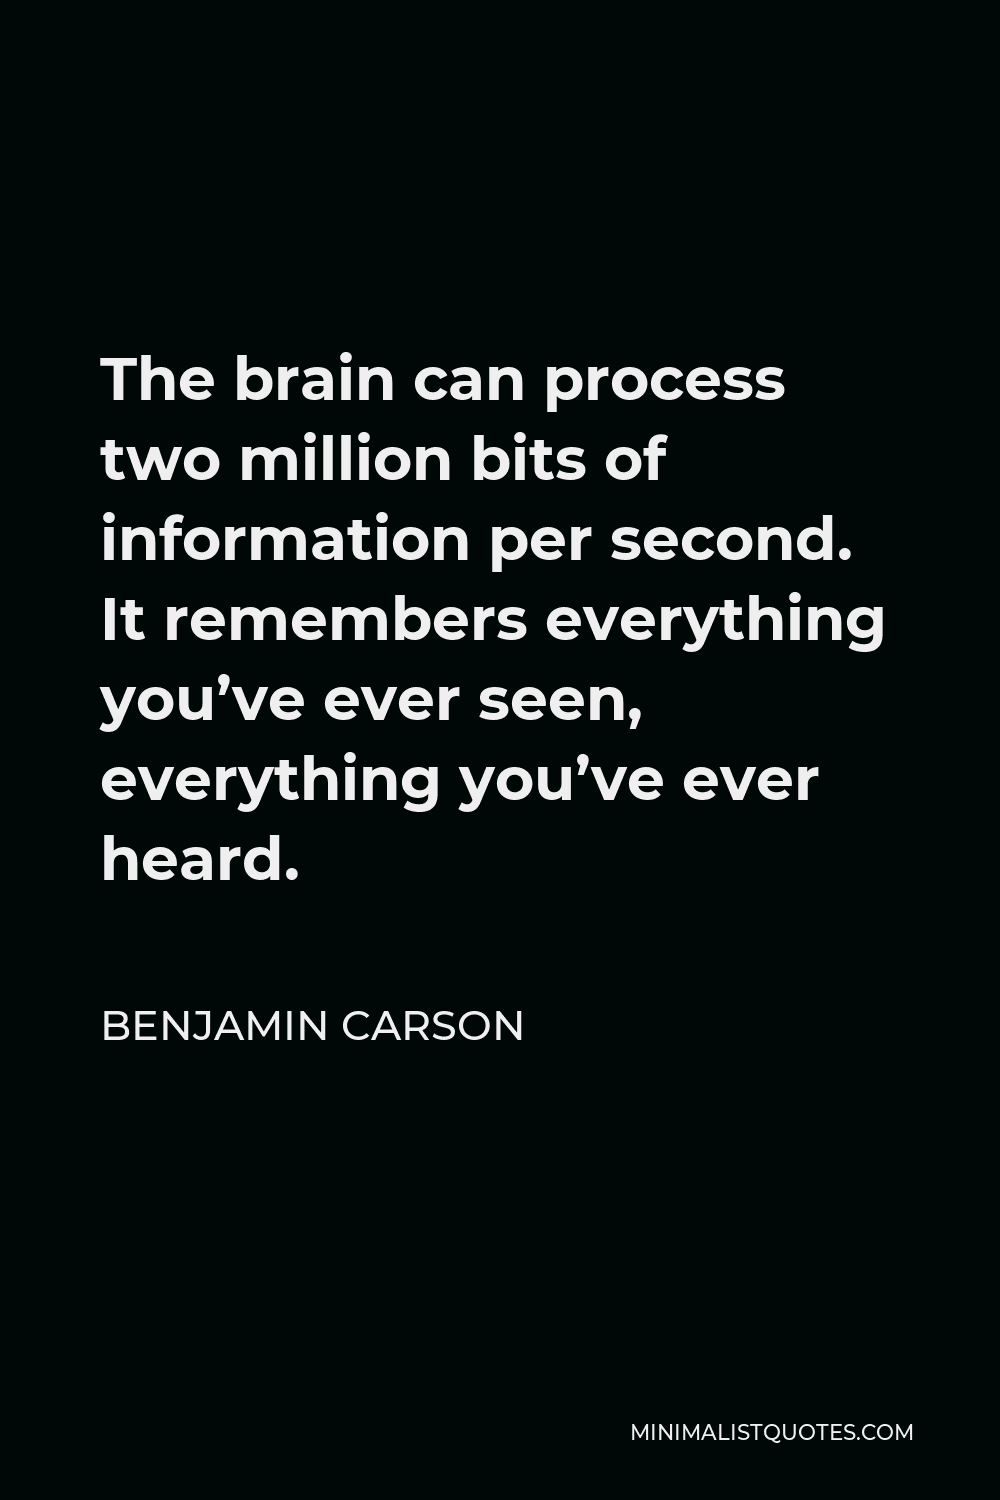 Benjamin Carson Quote - The brain can process two million bits of information per second. It remembers everything you’ve ever seen, everything you’ve ever heard.